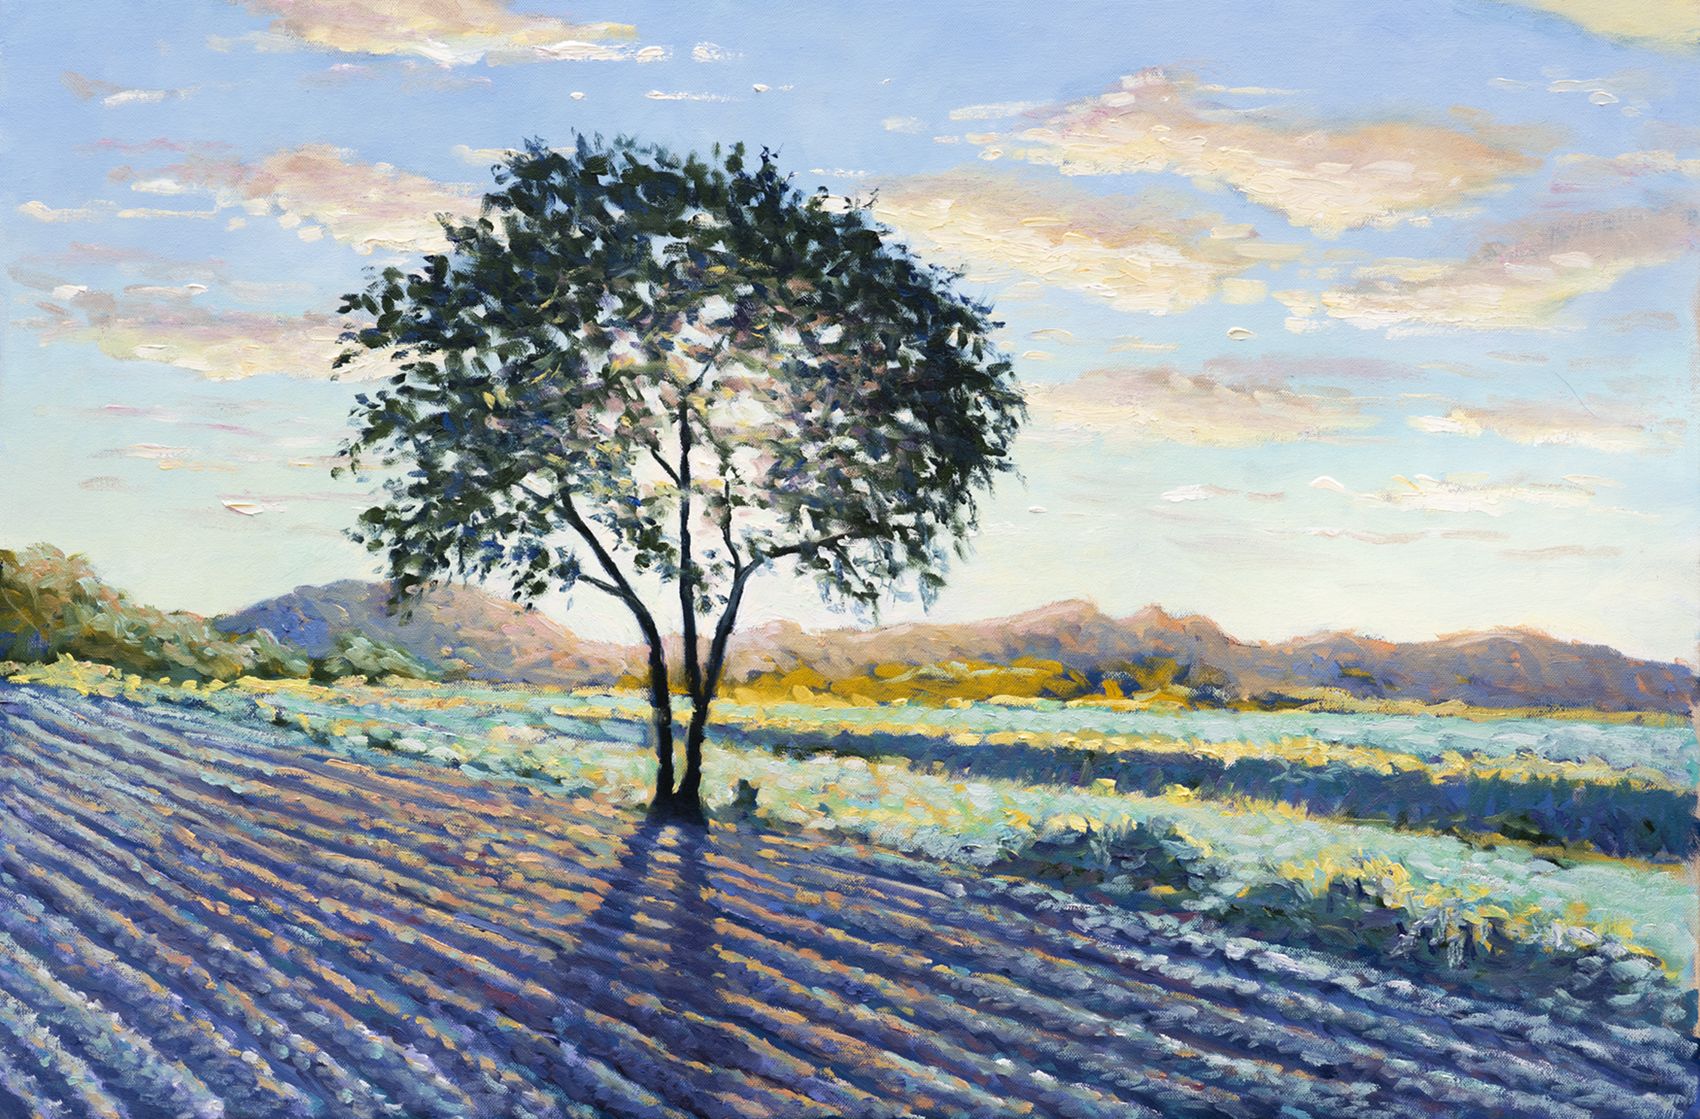 Dawn Frost (reflections of Pissarro) by Lee Tiller